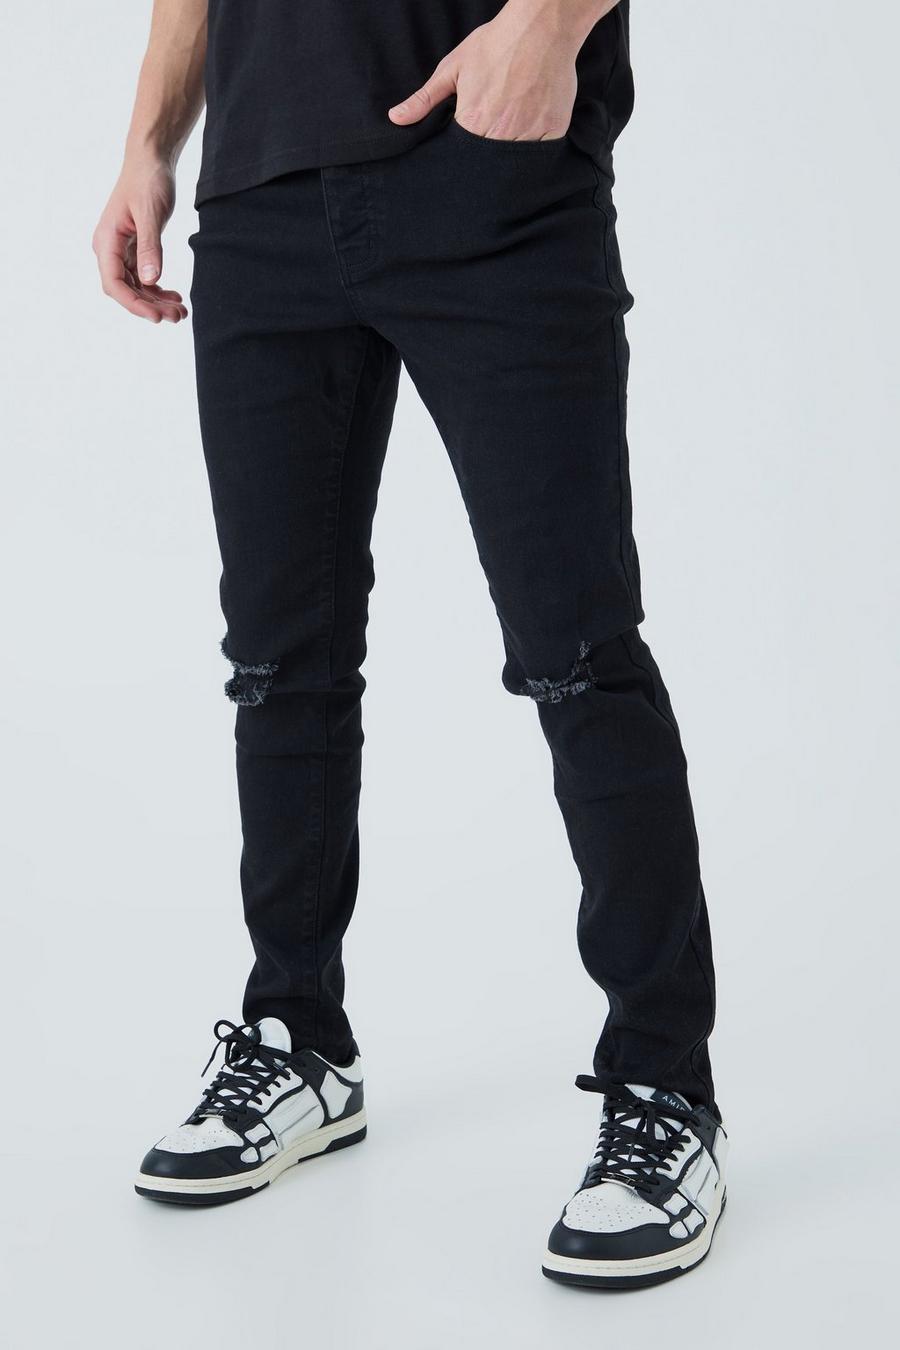 Black Skinny Jeans With Ripped Knees